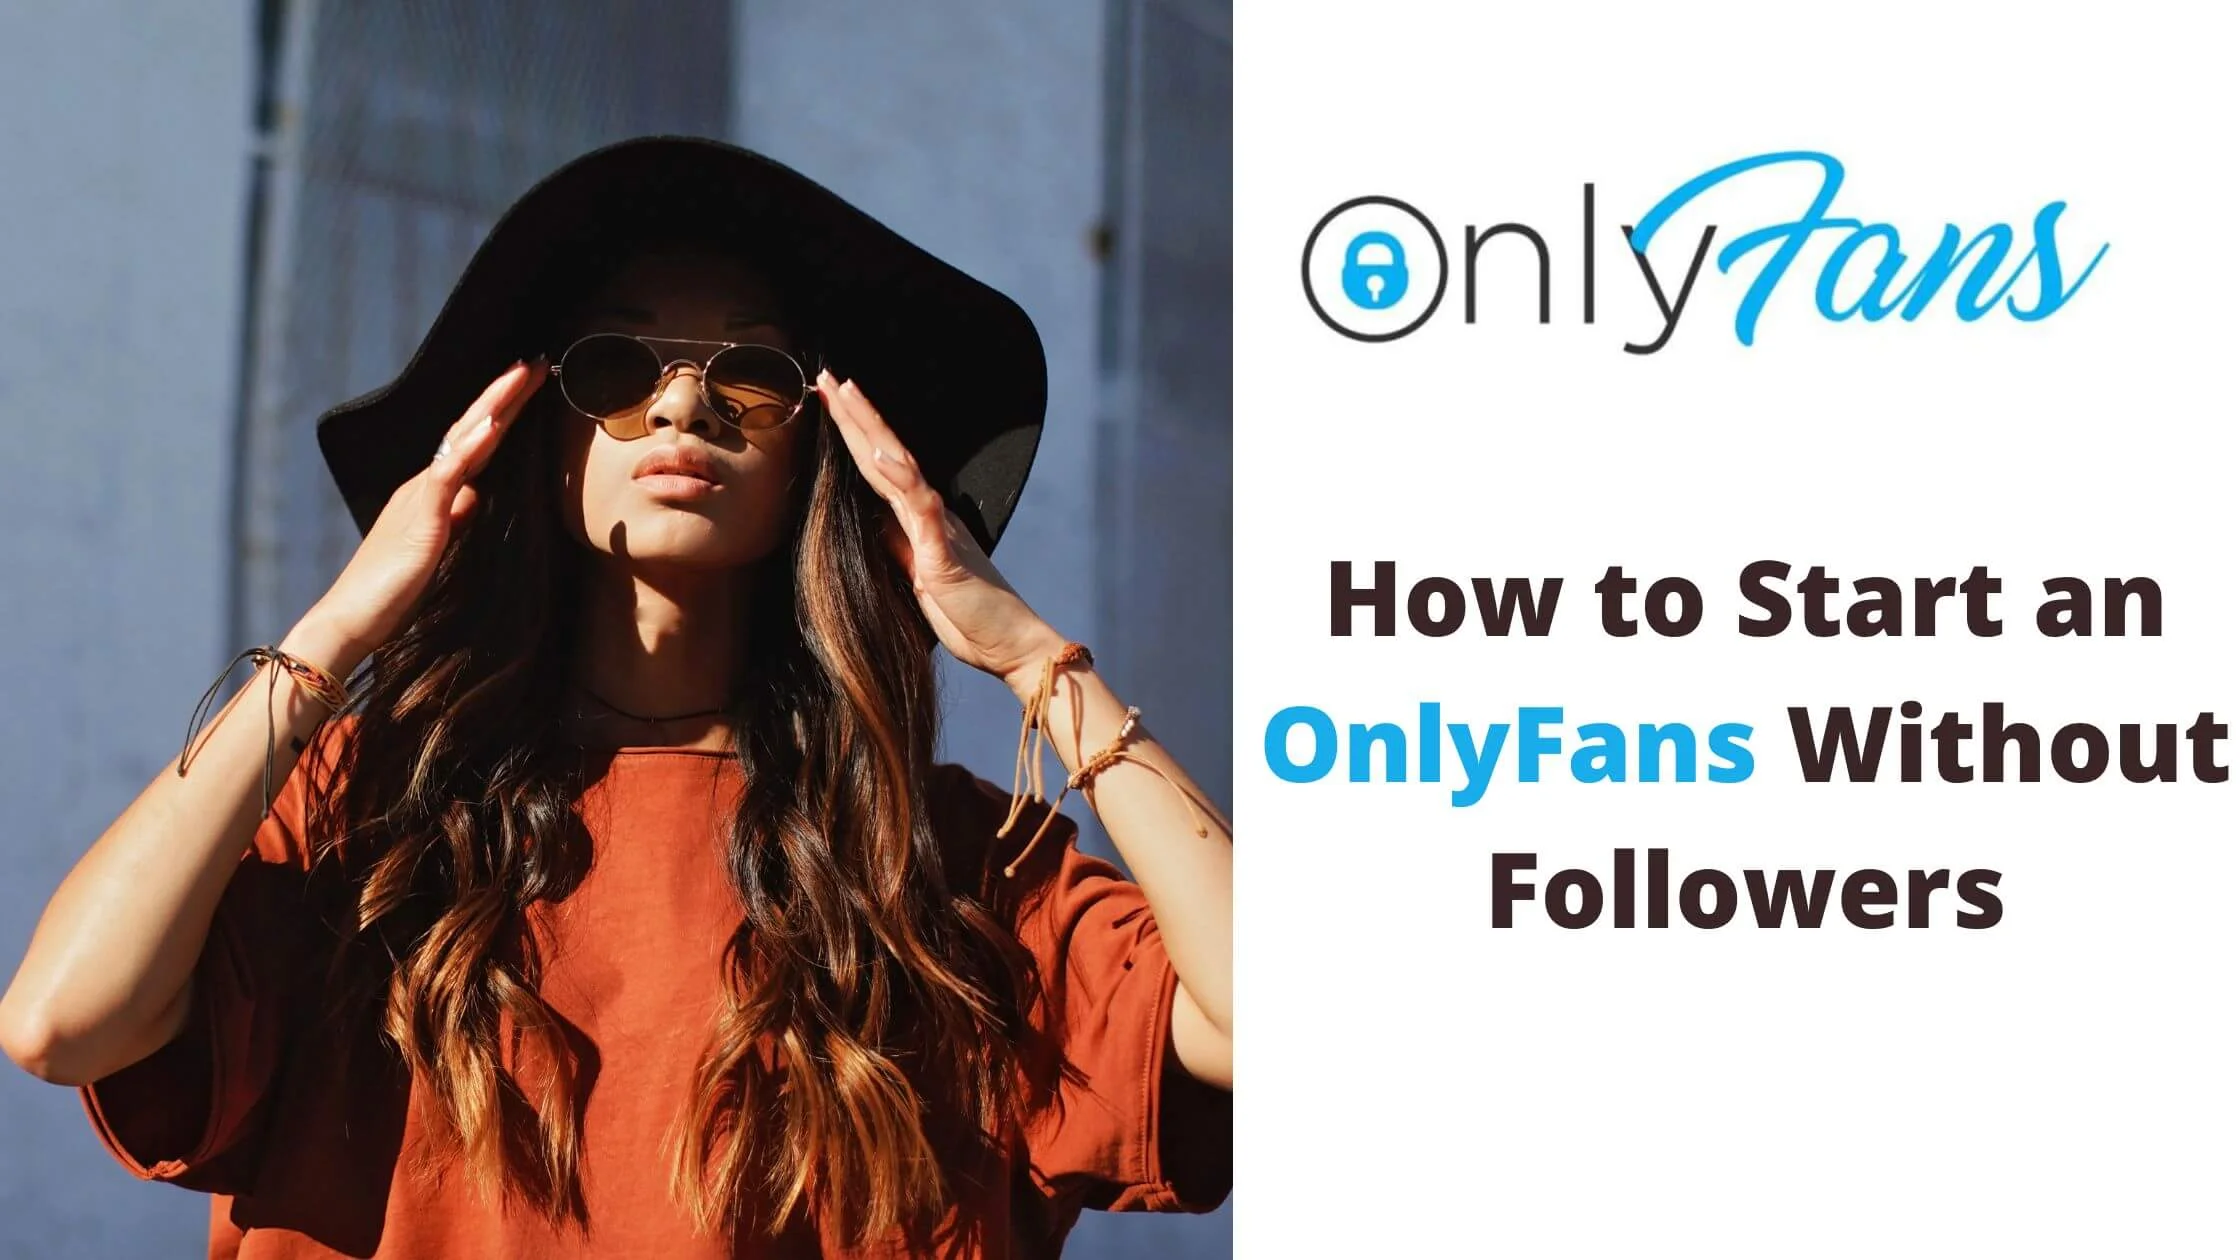 Start an OnlyFans Without Followers